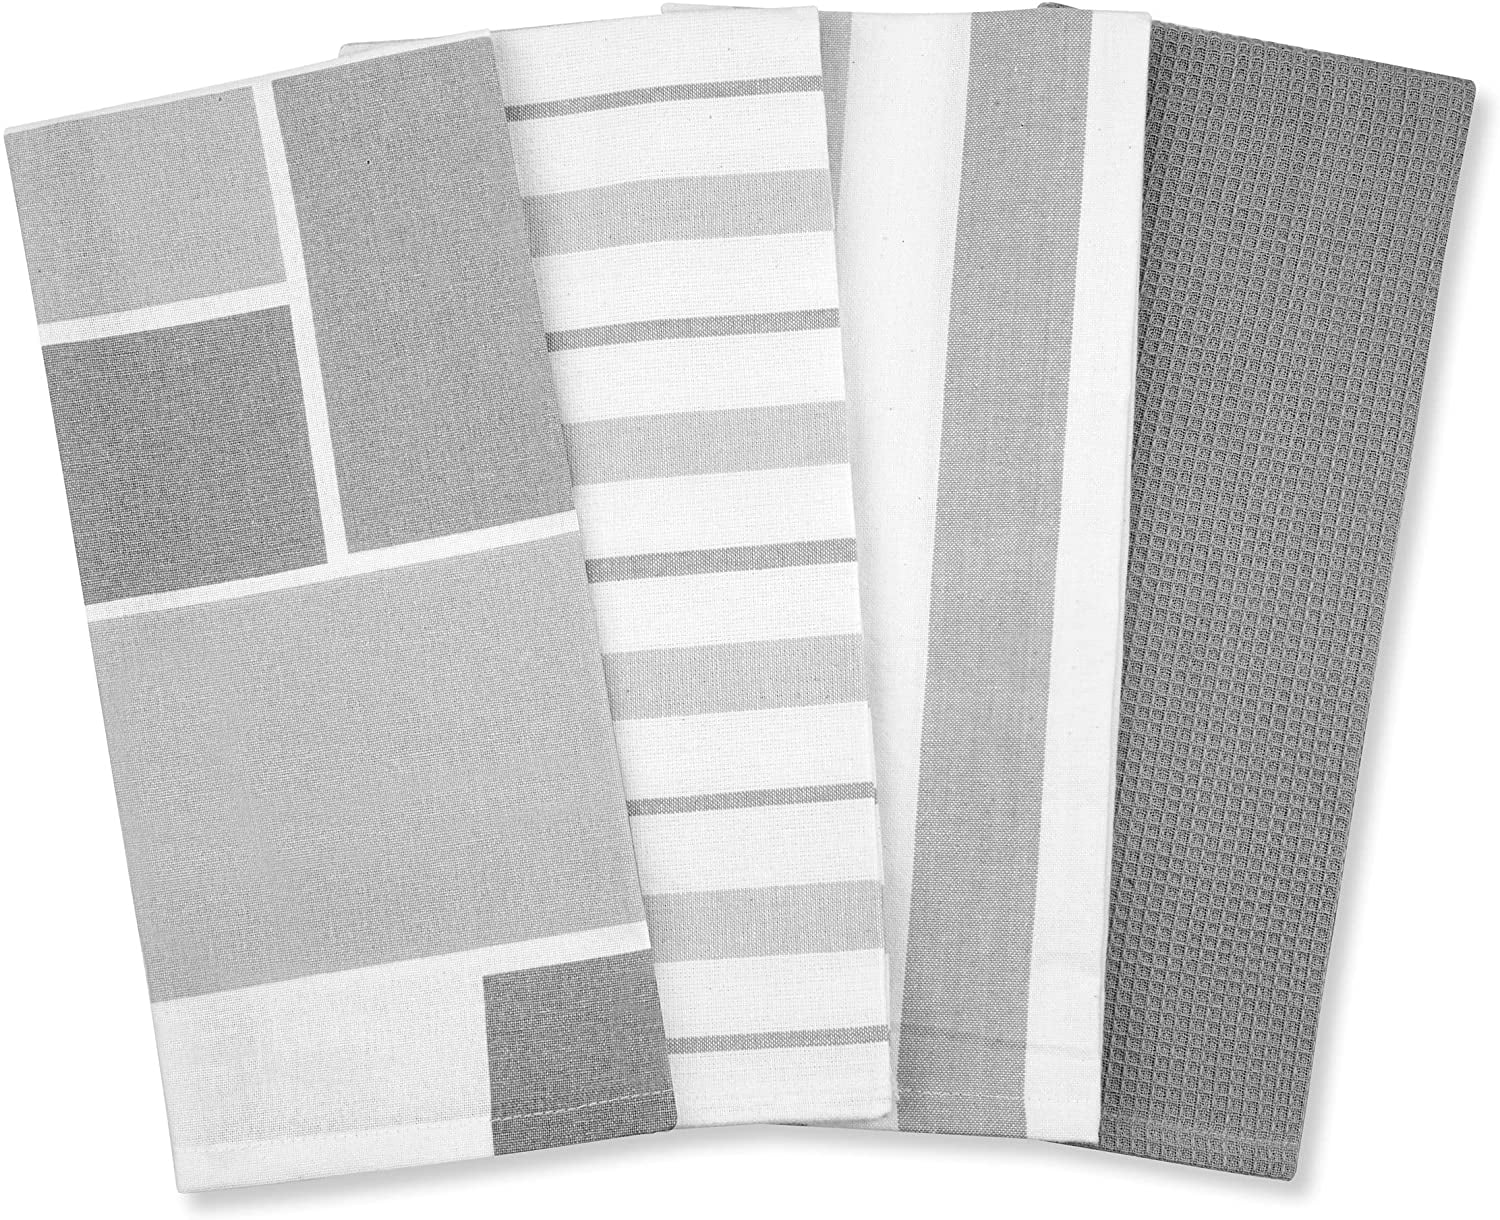 Dish Towels 100 Percent Cotton | Set of 4 for Drying and Kitchen Use  (Clementine Orange)